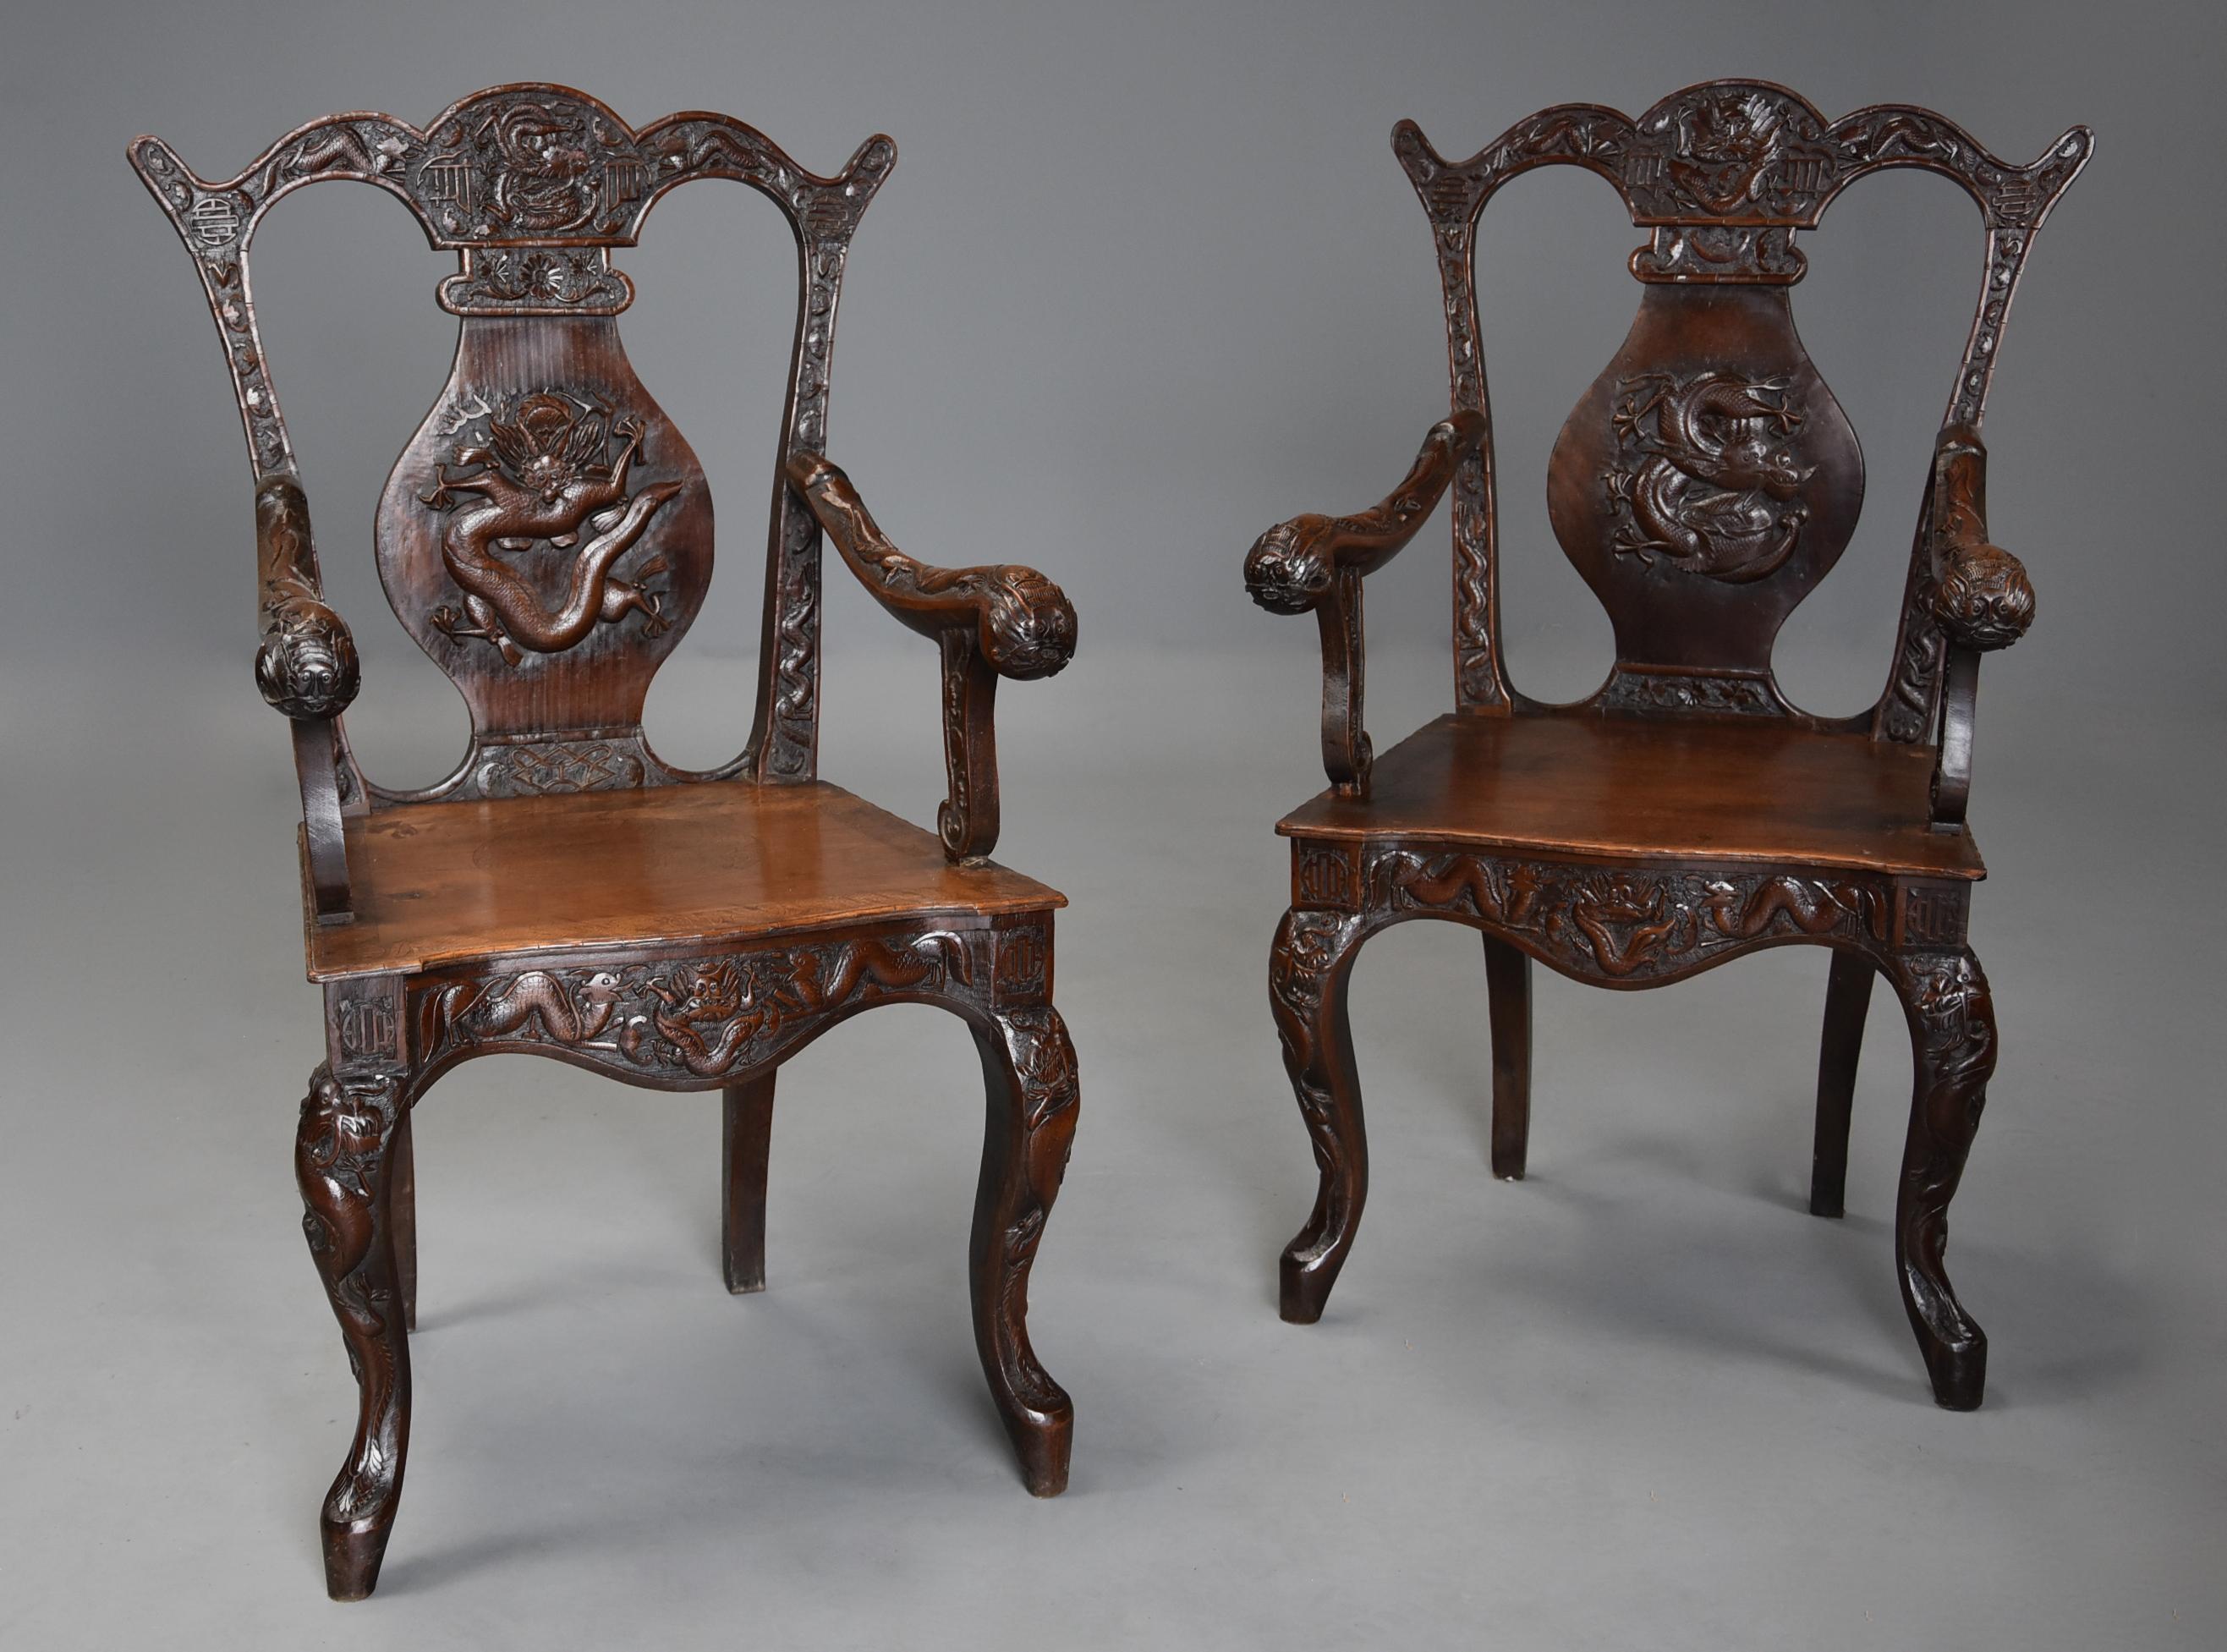 A pair of 19th century profusely carved walnut open armchairs of Chinese influence in the 18th century style, possibly French.

This highly decorative pair of chairs consist of a shaped top rail with dragon, Chinese symbol, bat and floral carved